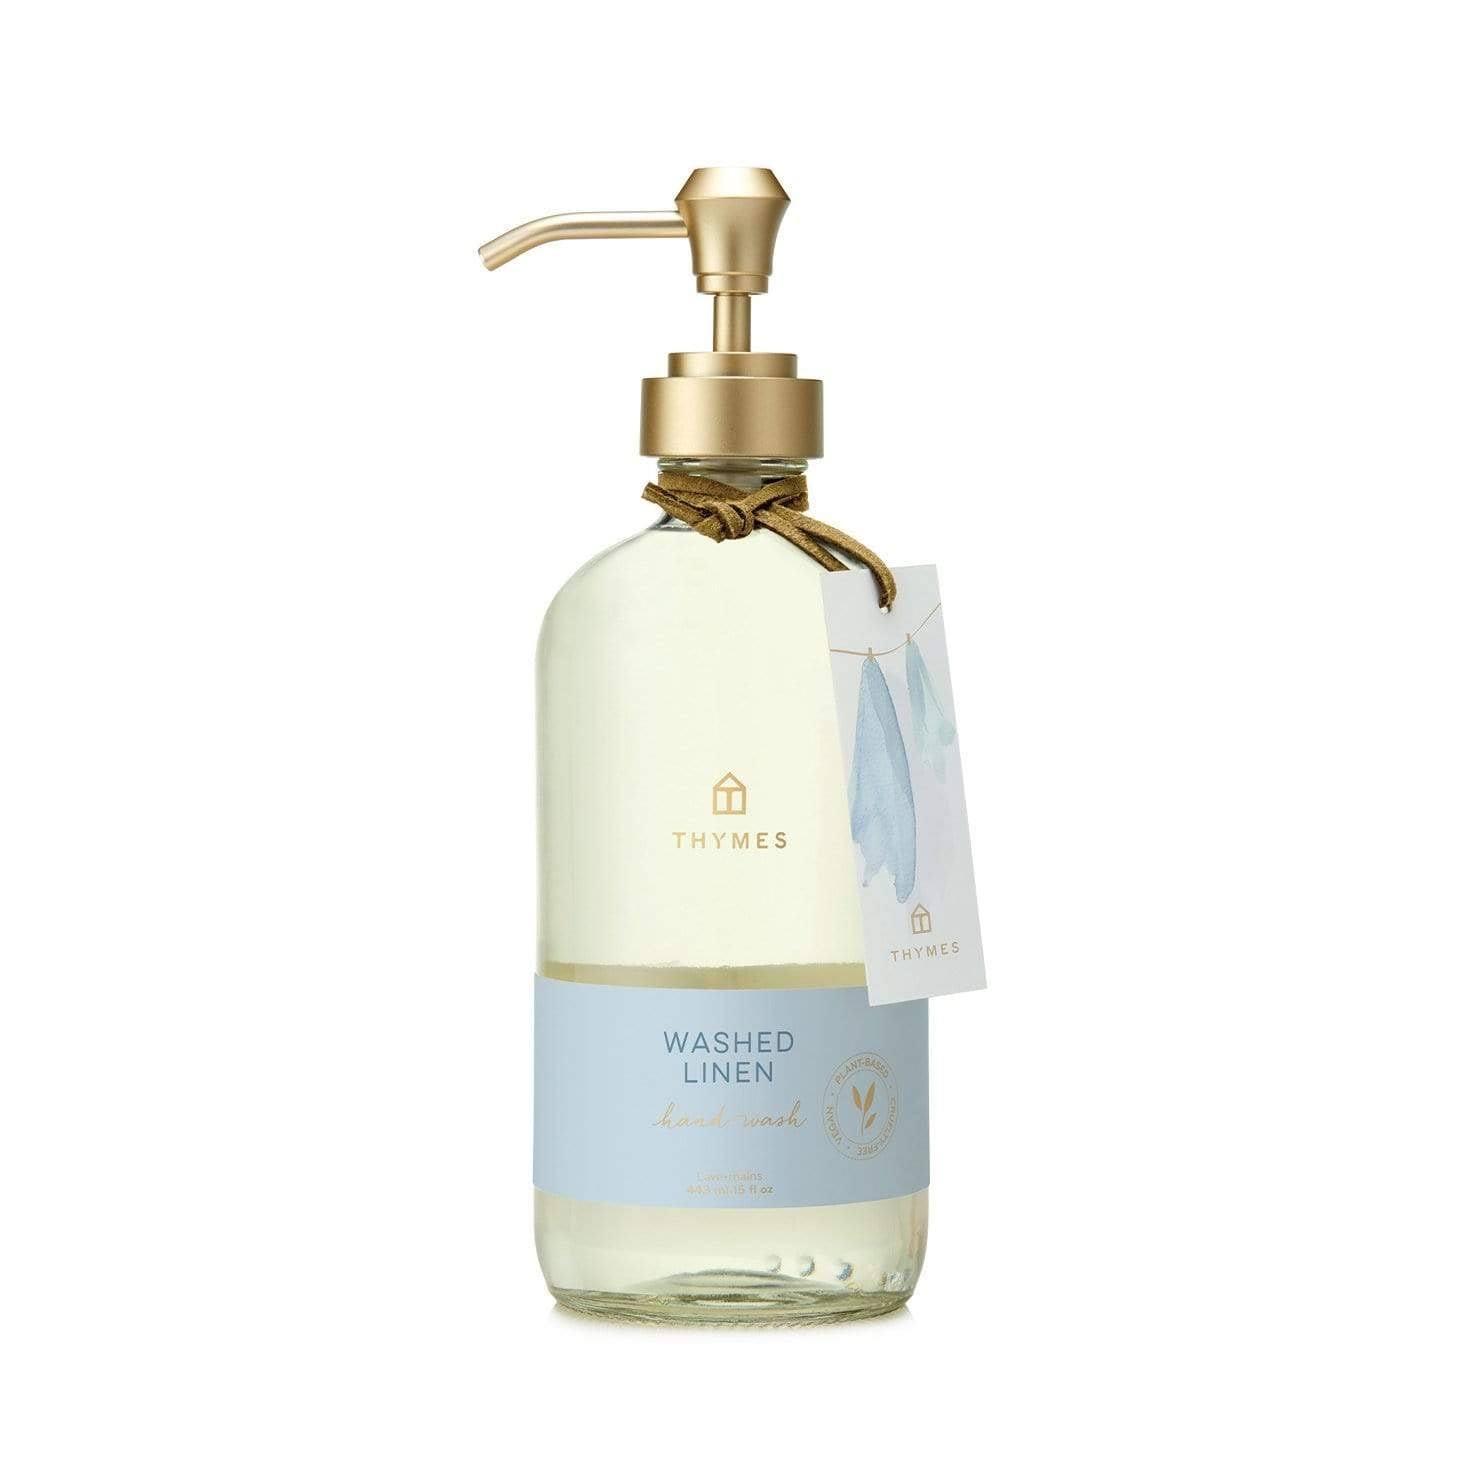 THYMES WASHED LINEN LARGE HAND WASH